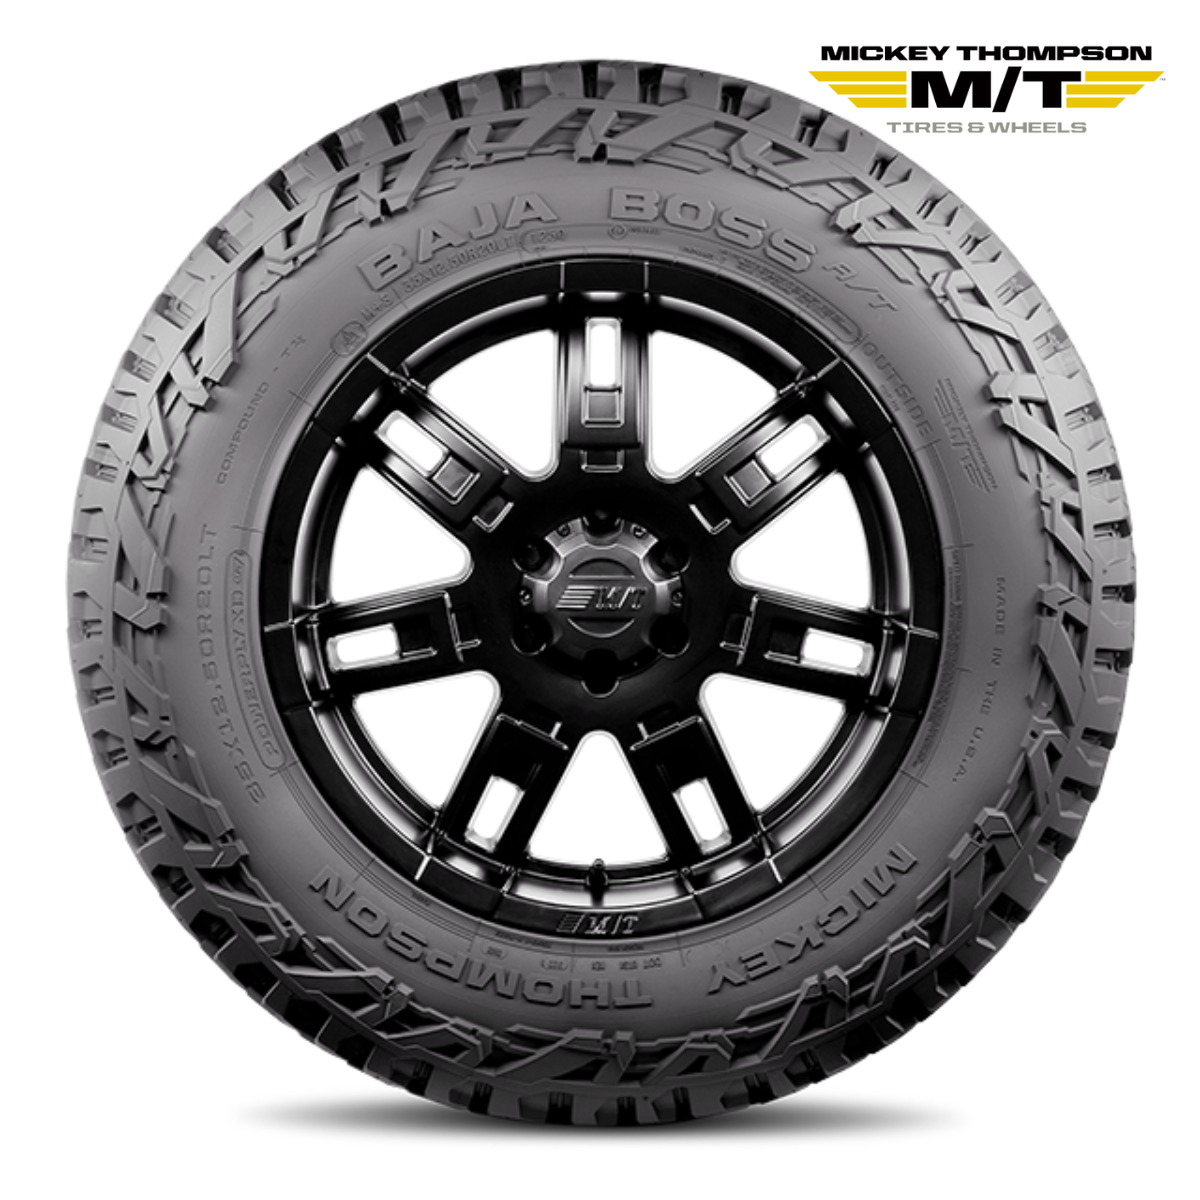 Never let weather slow you down with Mickey Thompson’s Baja Boss A/T Tires. Mickey Thompson’s Baja Boss A/T tires deliver undisputed on-road handling, performance, and tread life while also dominating in the mud. Featuring aggressive looks, low noise, long-lasting tread, smooth ride, and severe weather rating,these are Mickey Thompson's best A/Ts to date. The asymmetrical tread pattern is optimized for reduced noise, all-weather performance, off-road traction, and on-road handling. Extreme Sidebiters give them a bold look, extreme off-road traction, and additional protection. The Powerply XD adds 50% heavier denier cord to the angled third ply providing better puncture resistance, quicker steering response, and greater stability (LT-Sizes Only). The tires are also Severe Snow Service Rated with the 3PMS Symbol and all sizes 12.50 (315) and narrower are severe snow rated. Stop in and prepare for any weather conditions with Mickey Thompson’s Baja Boss A/T Tires.